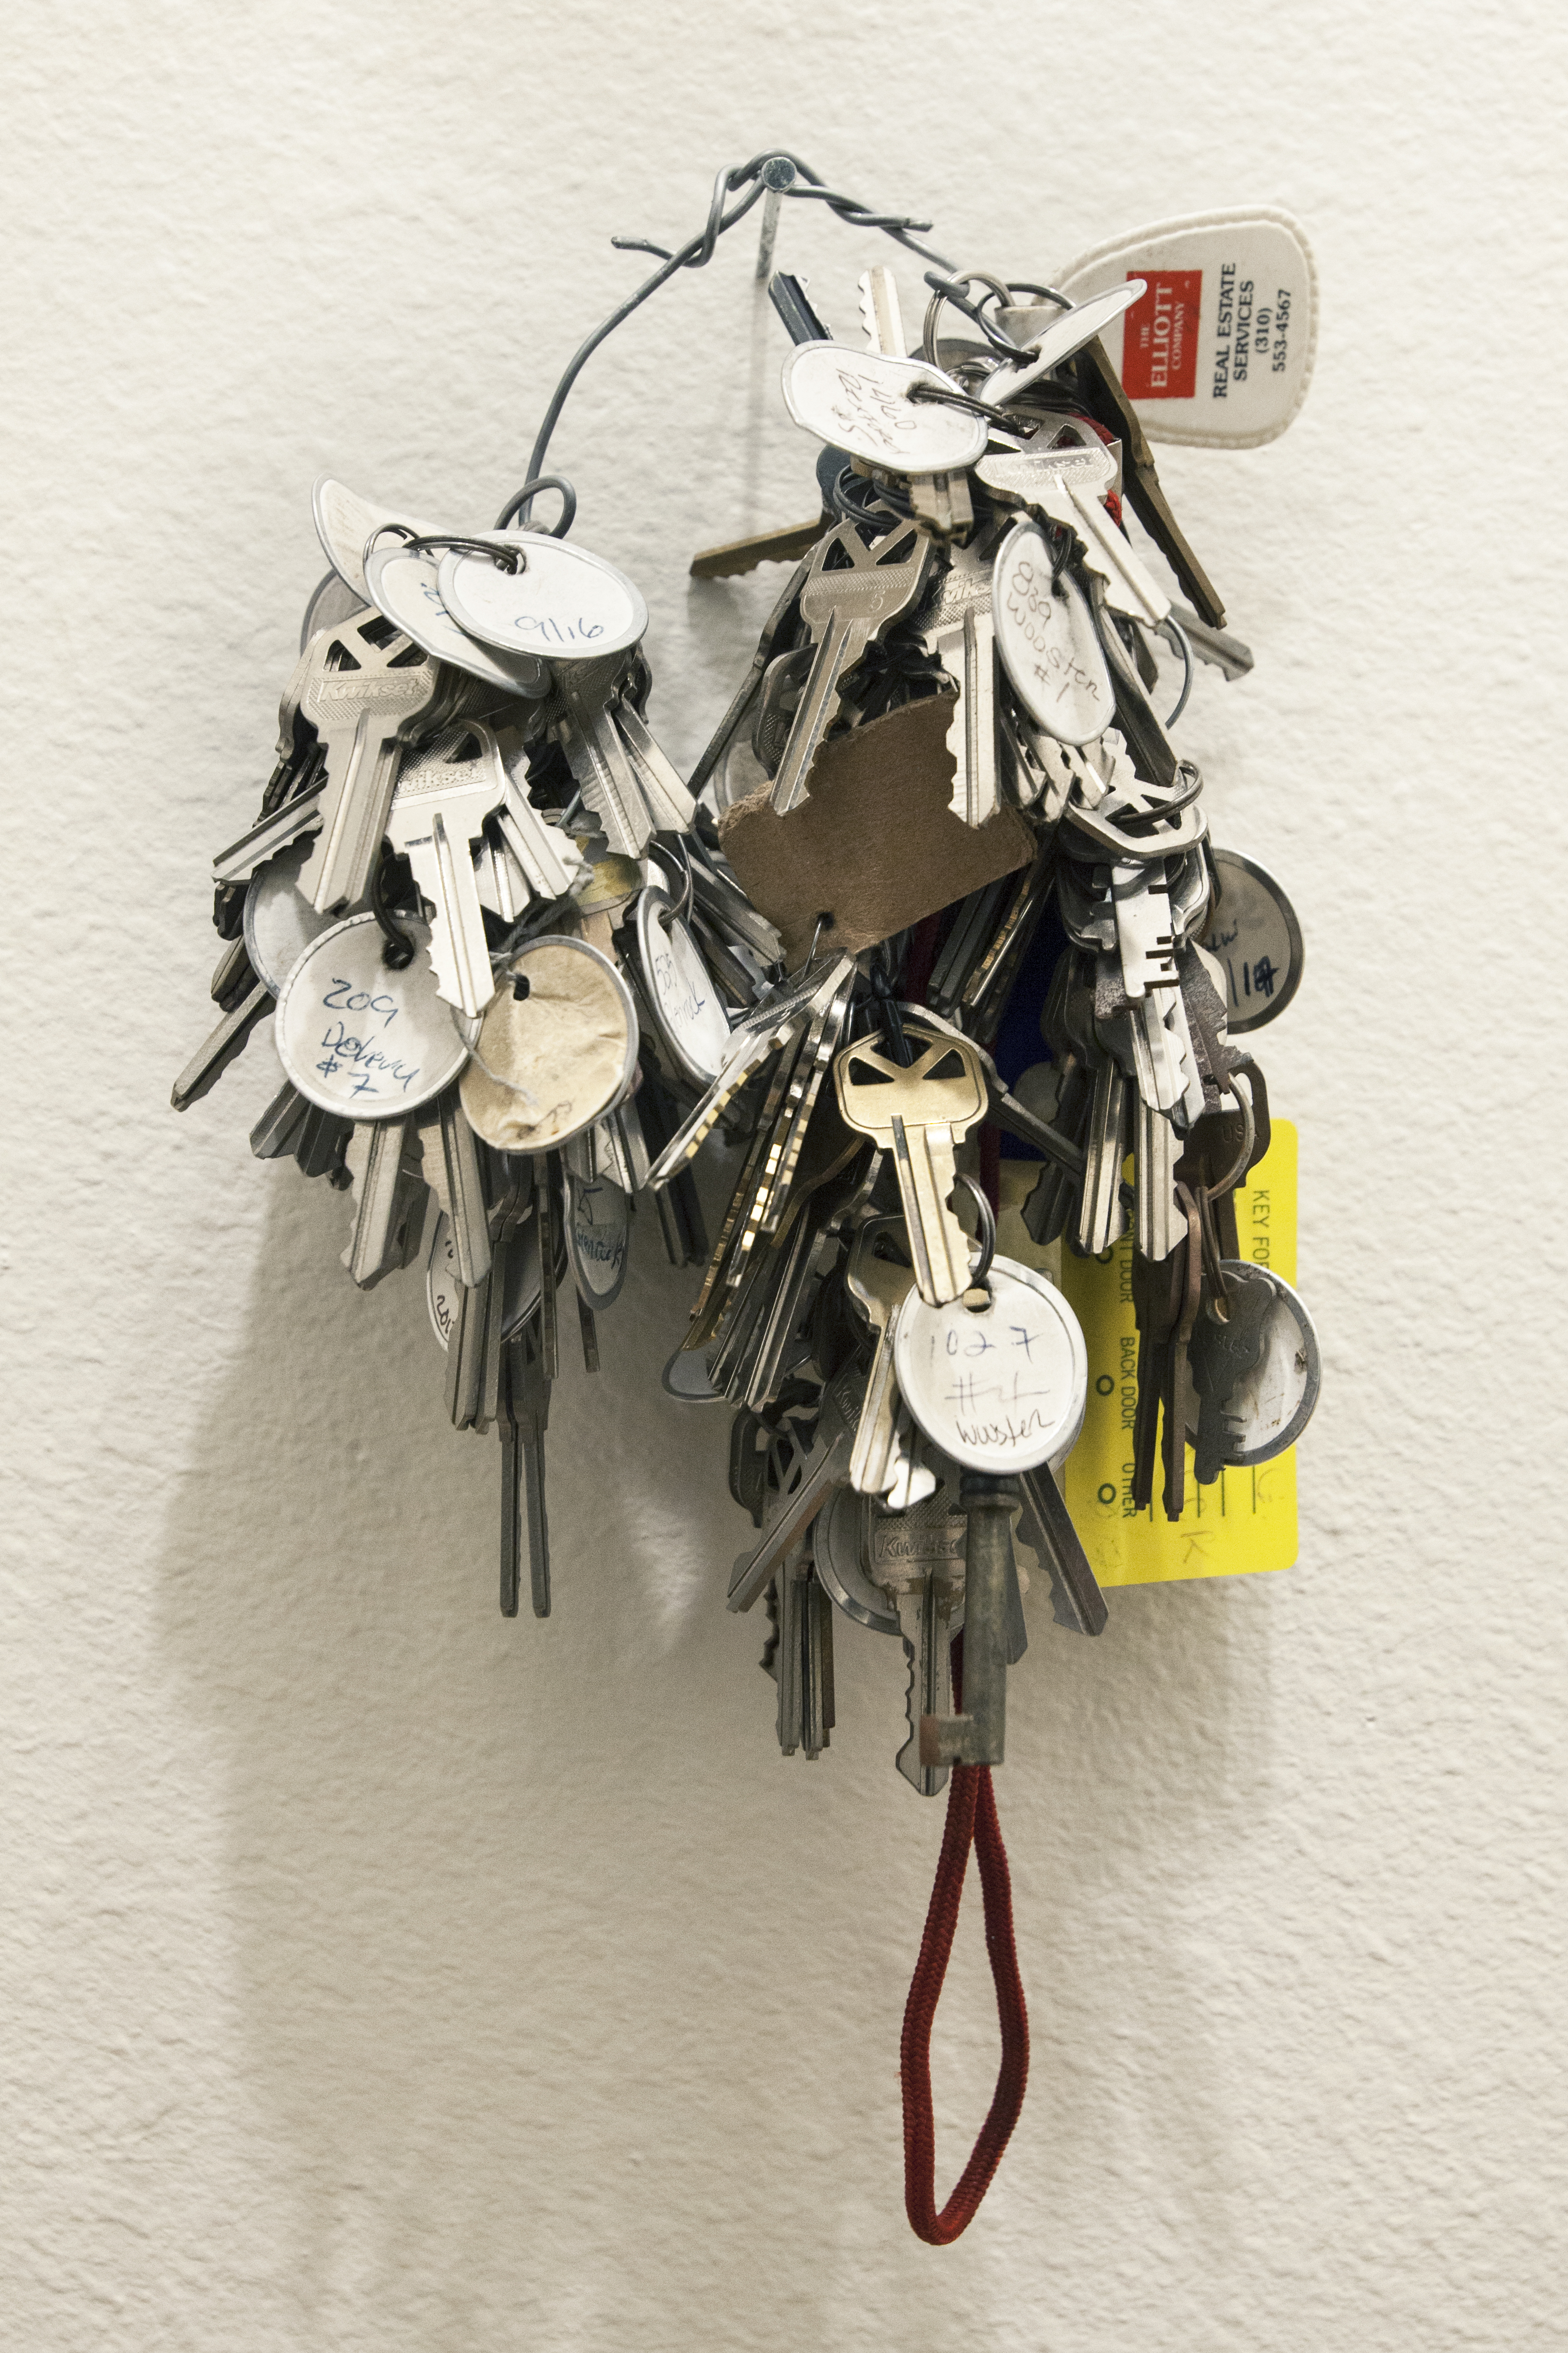 A ring with a large volume of keys on it hung on the wall